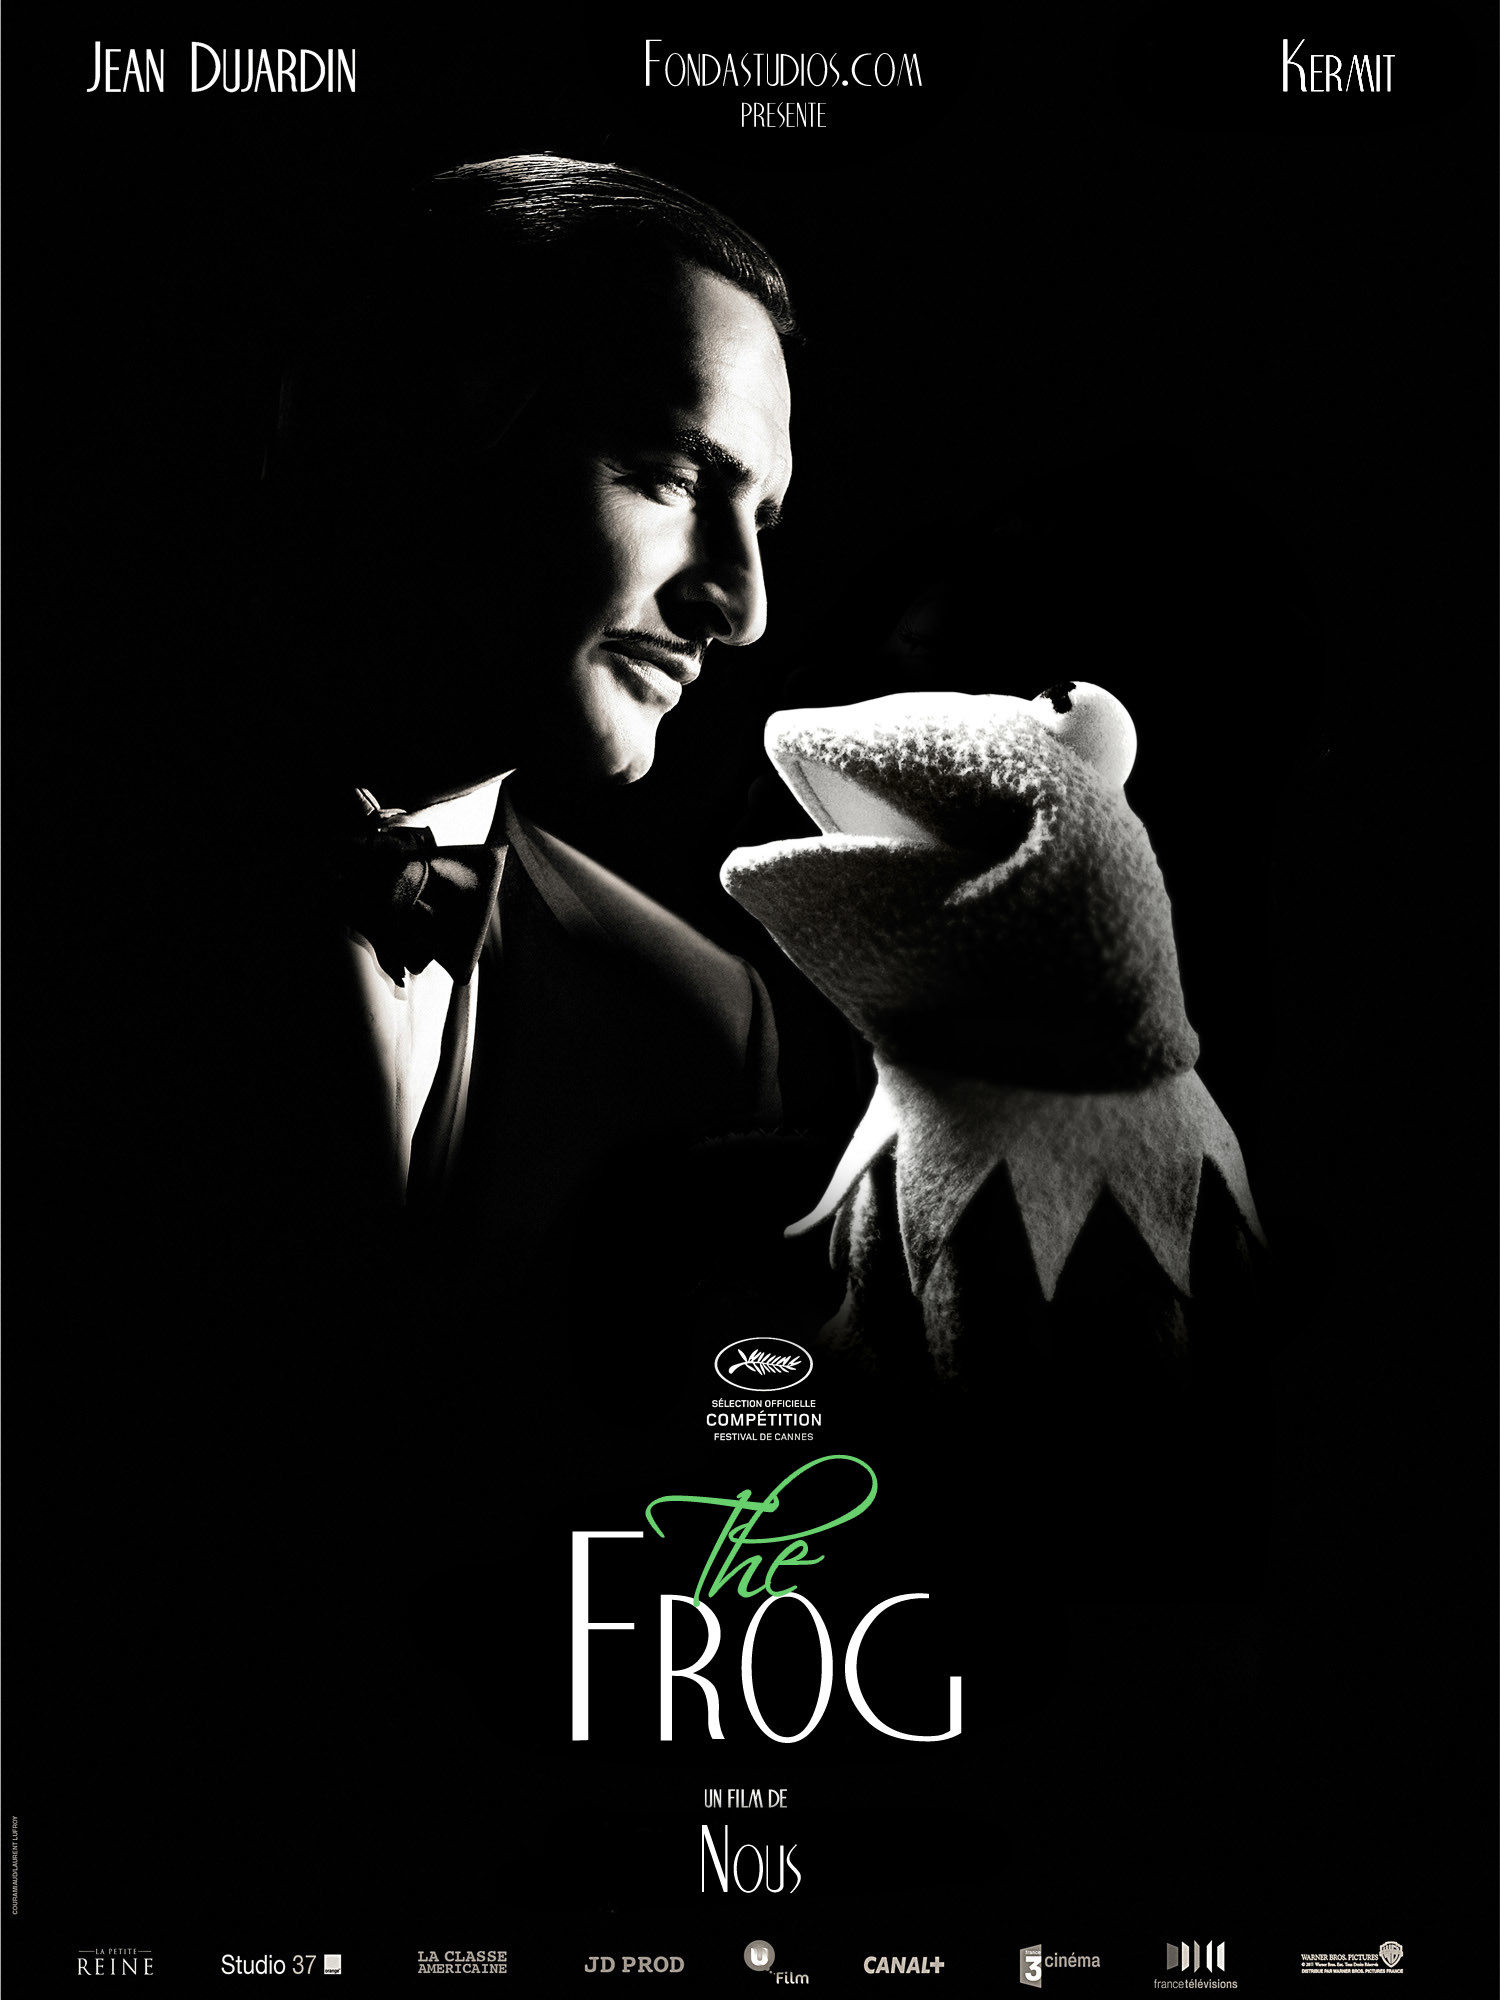 Kermit The Frog Images The Frog Or The Artist Hd Wallpaper - Artist Movie Hd Poster - HD Wallpaper 